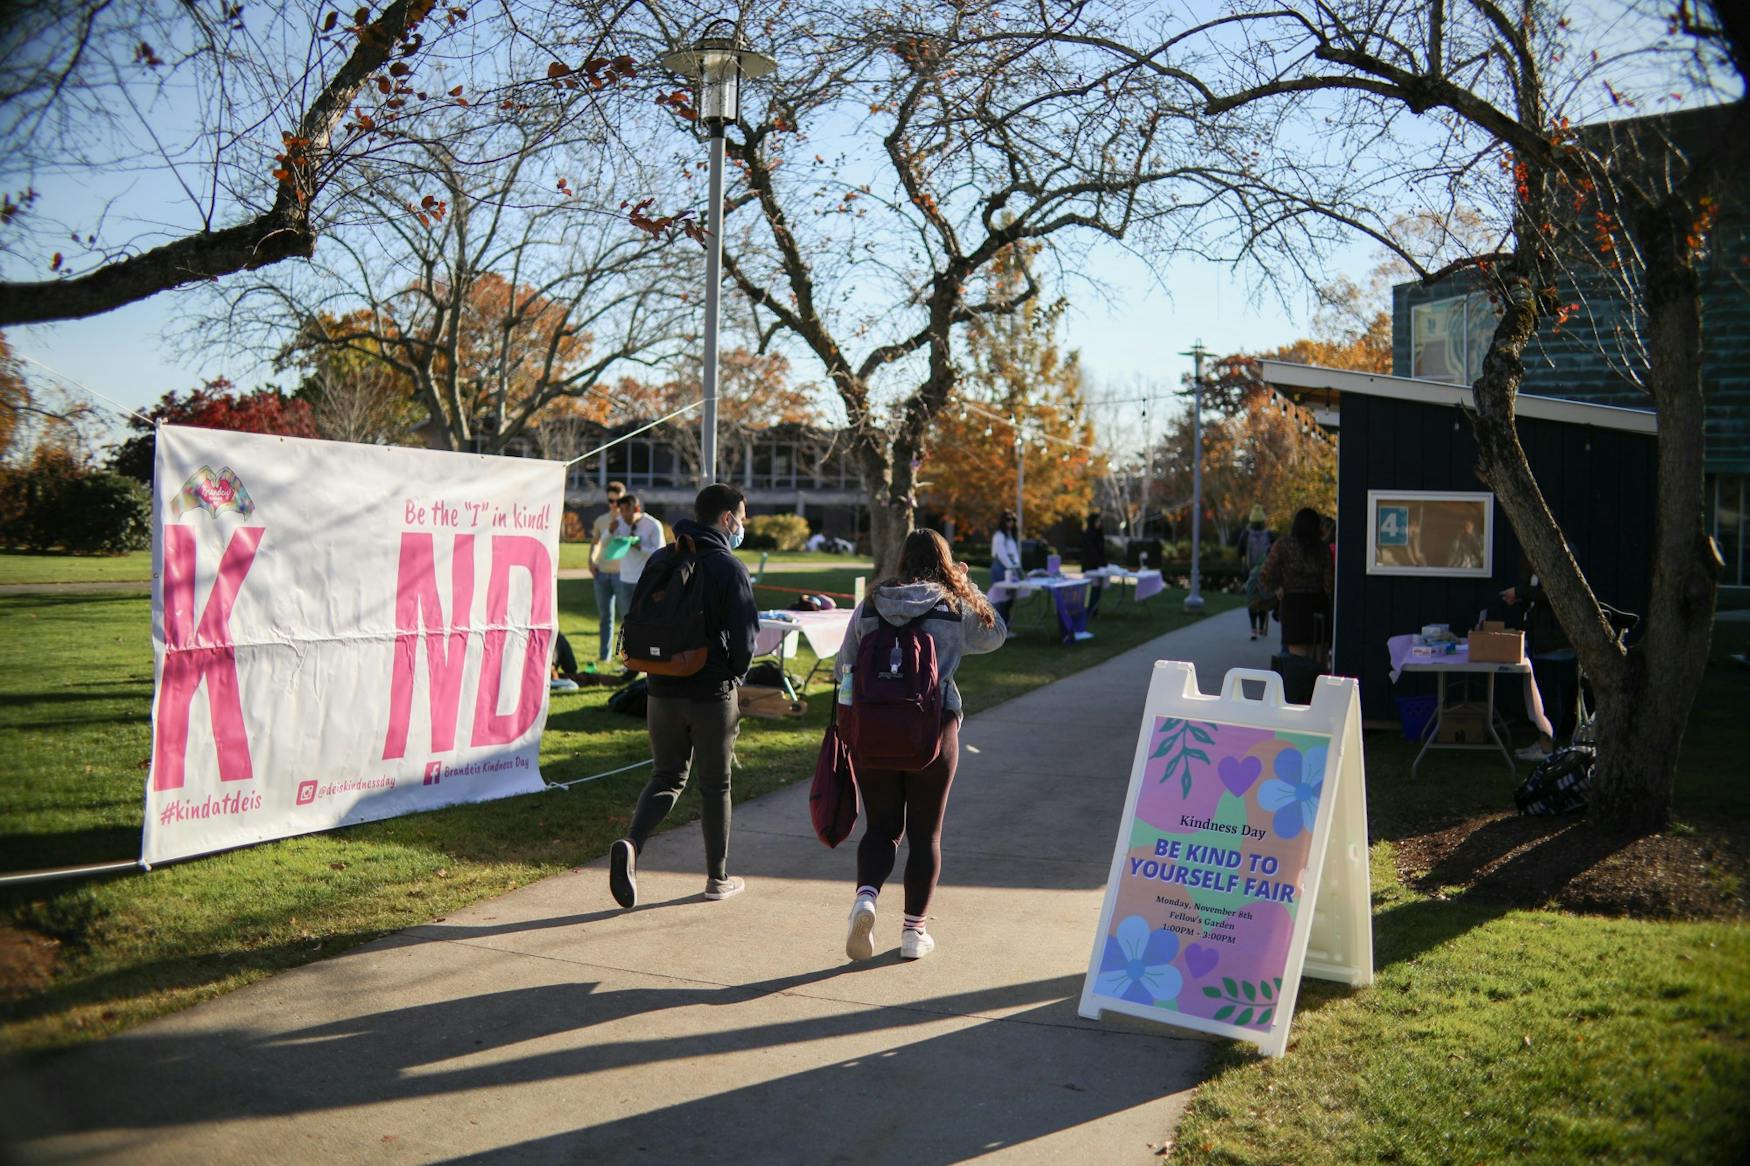 Students came to the "Be Kind to Yourself Fair" at Fellows Garden on Nov. 8.